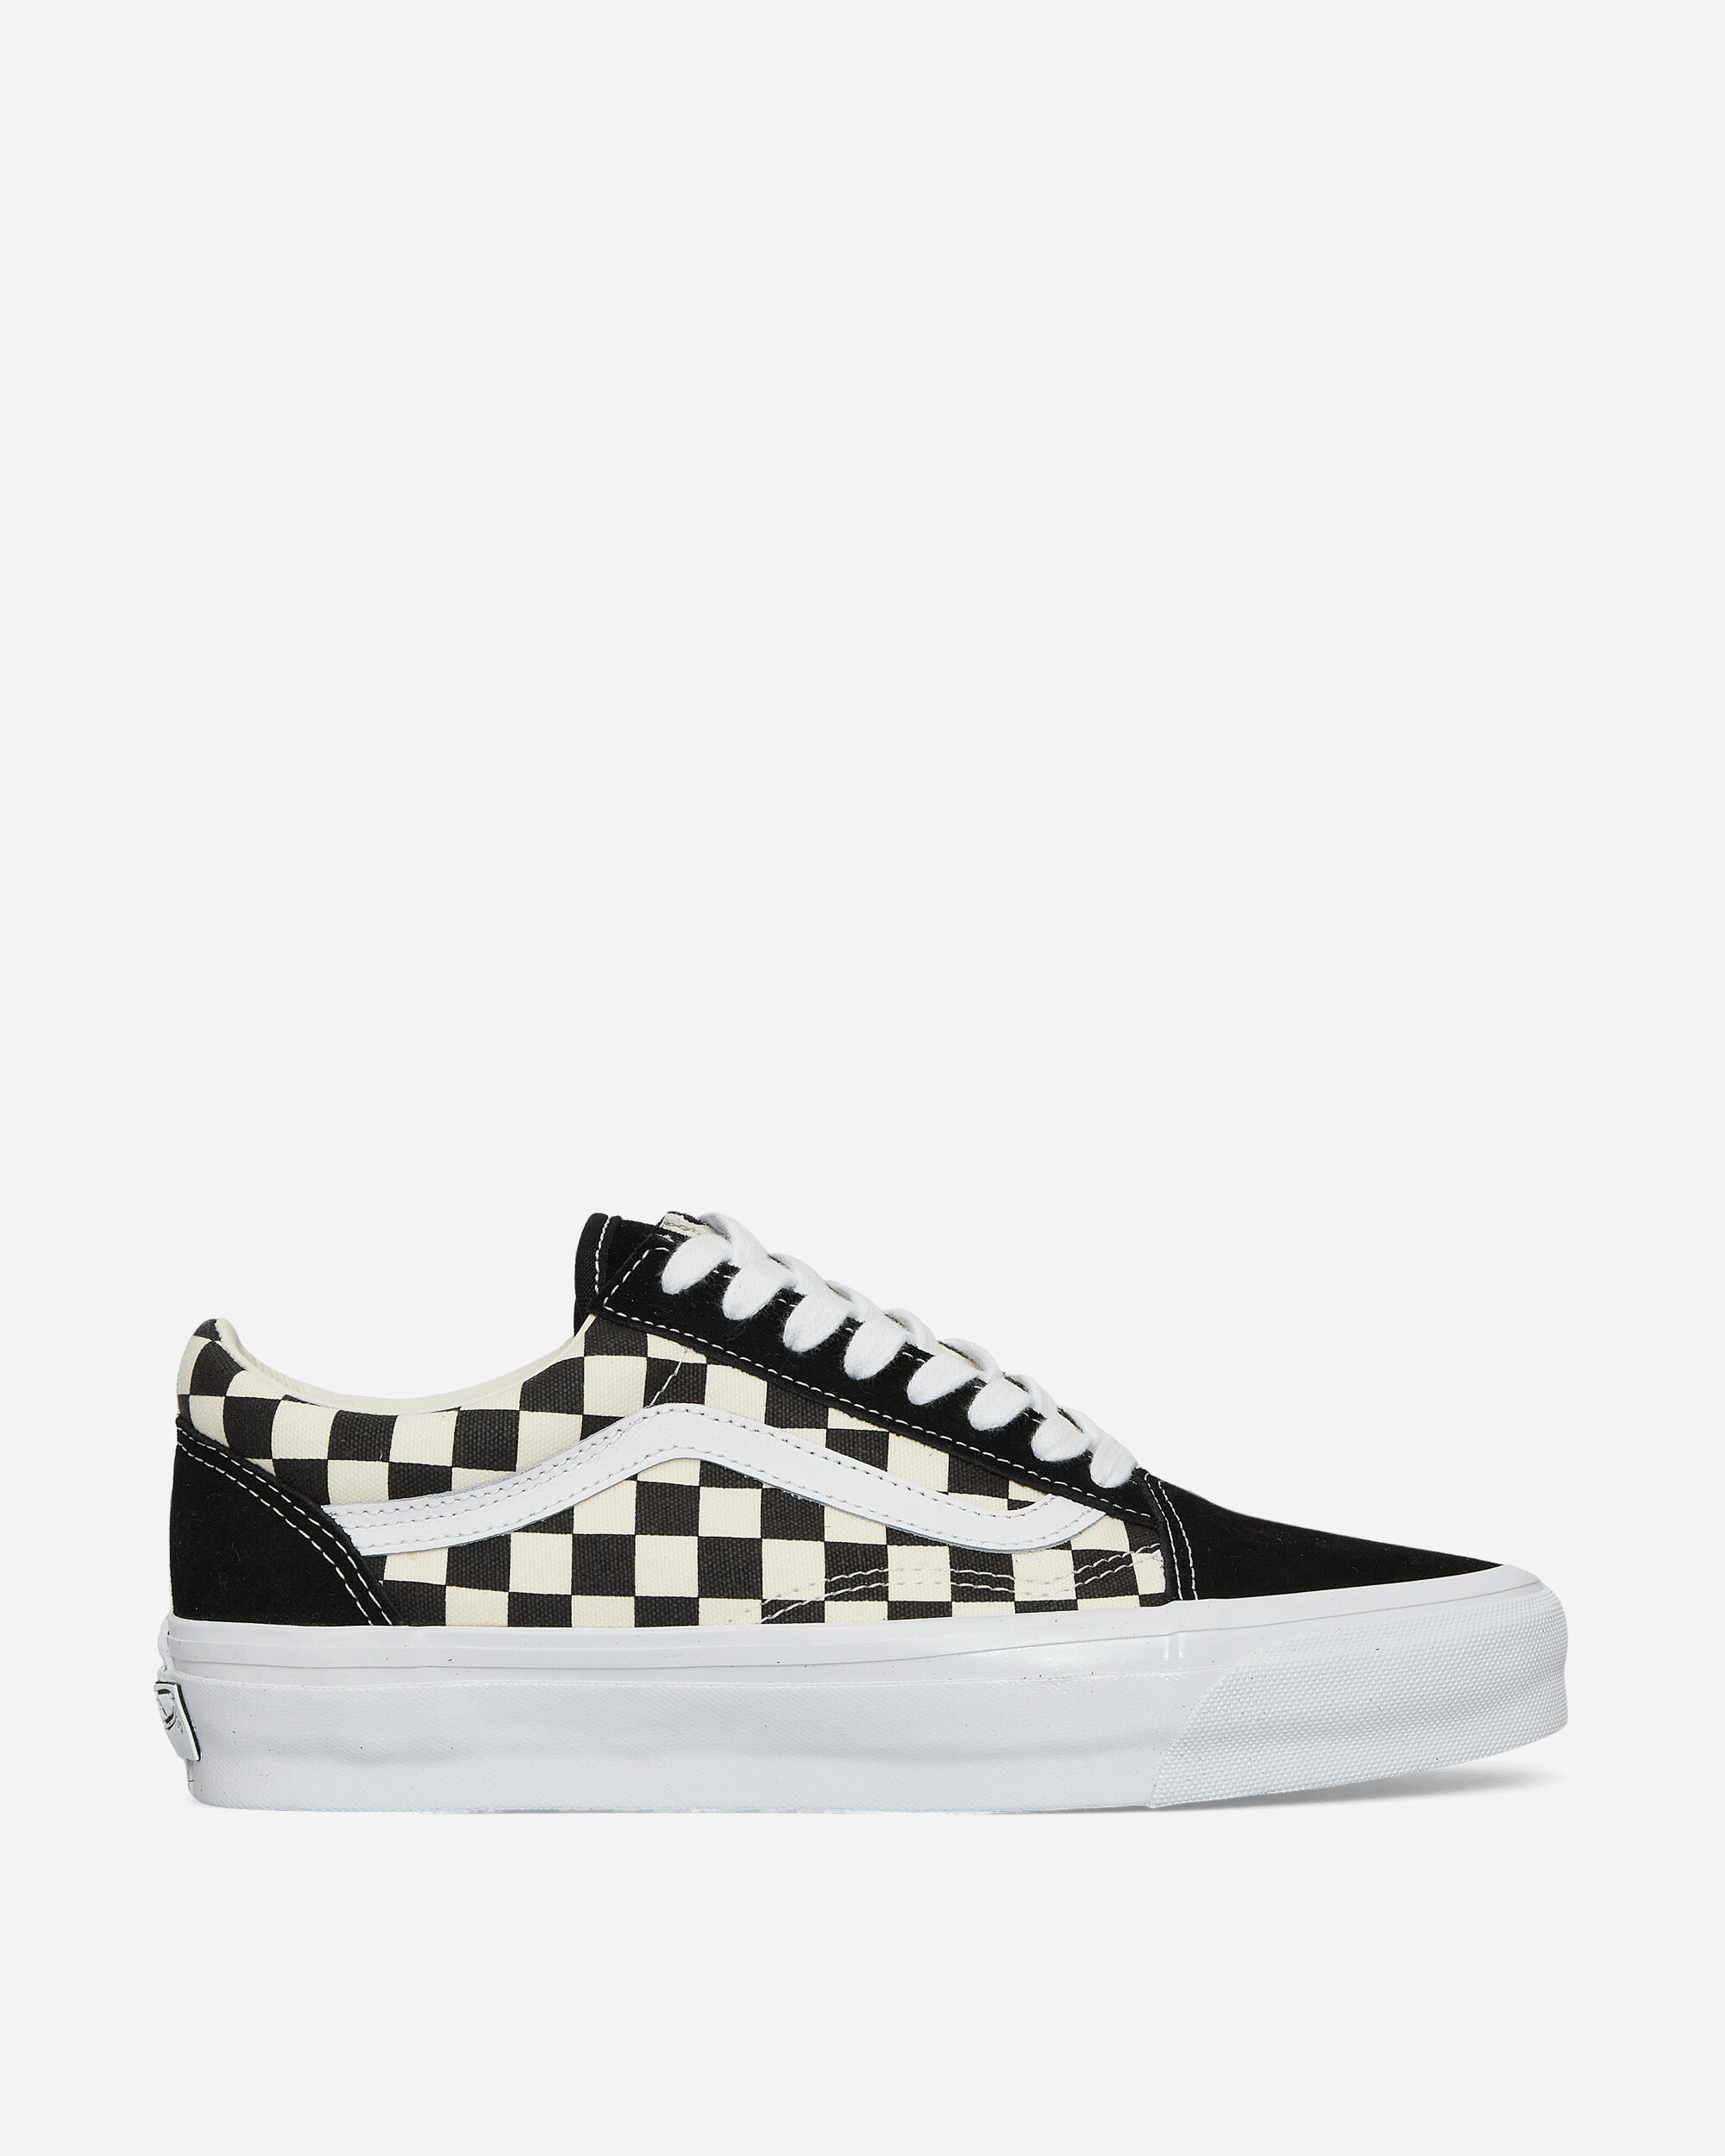 Vans Authentic Reissue 44 Checkerboard Black/Off White Sneakers Low VN000CQD2BO1